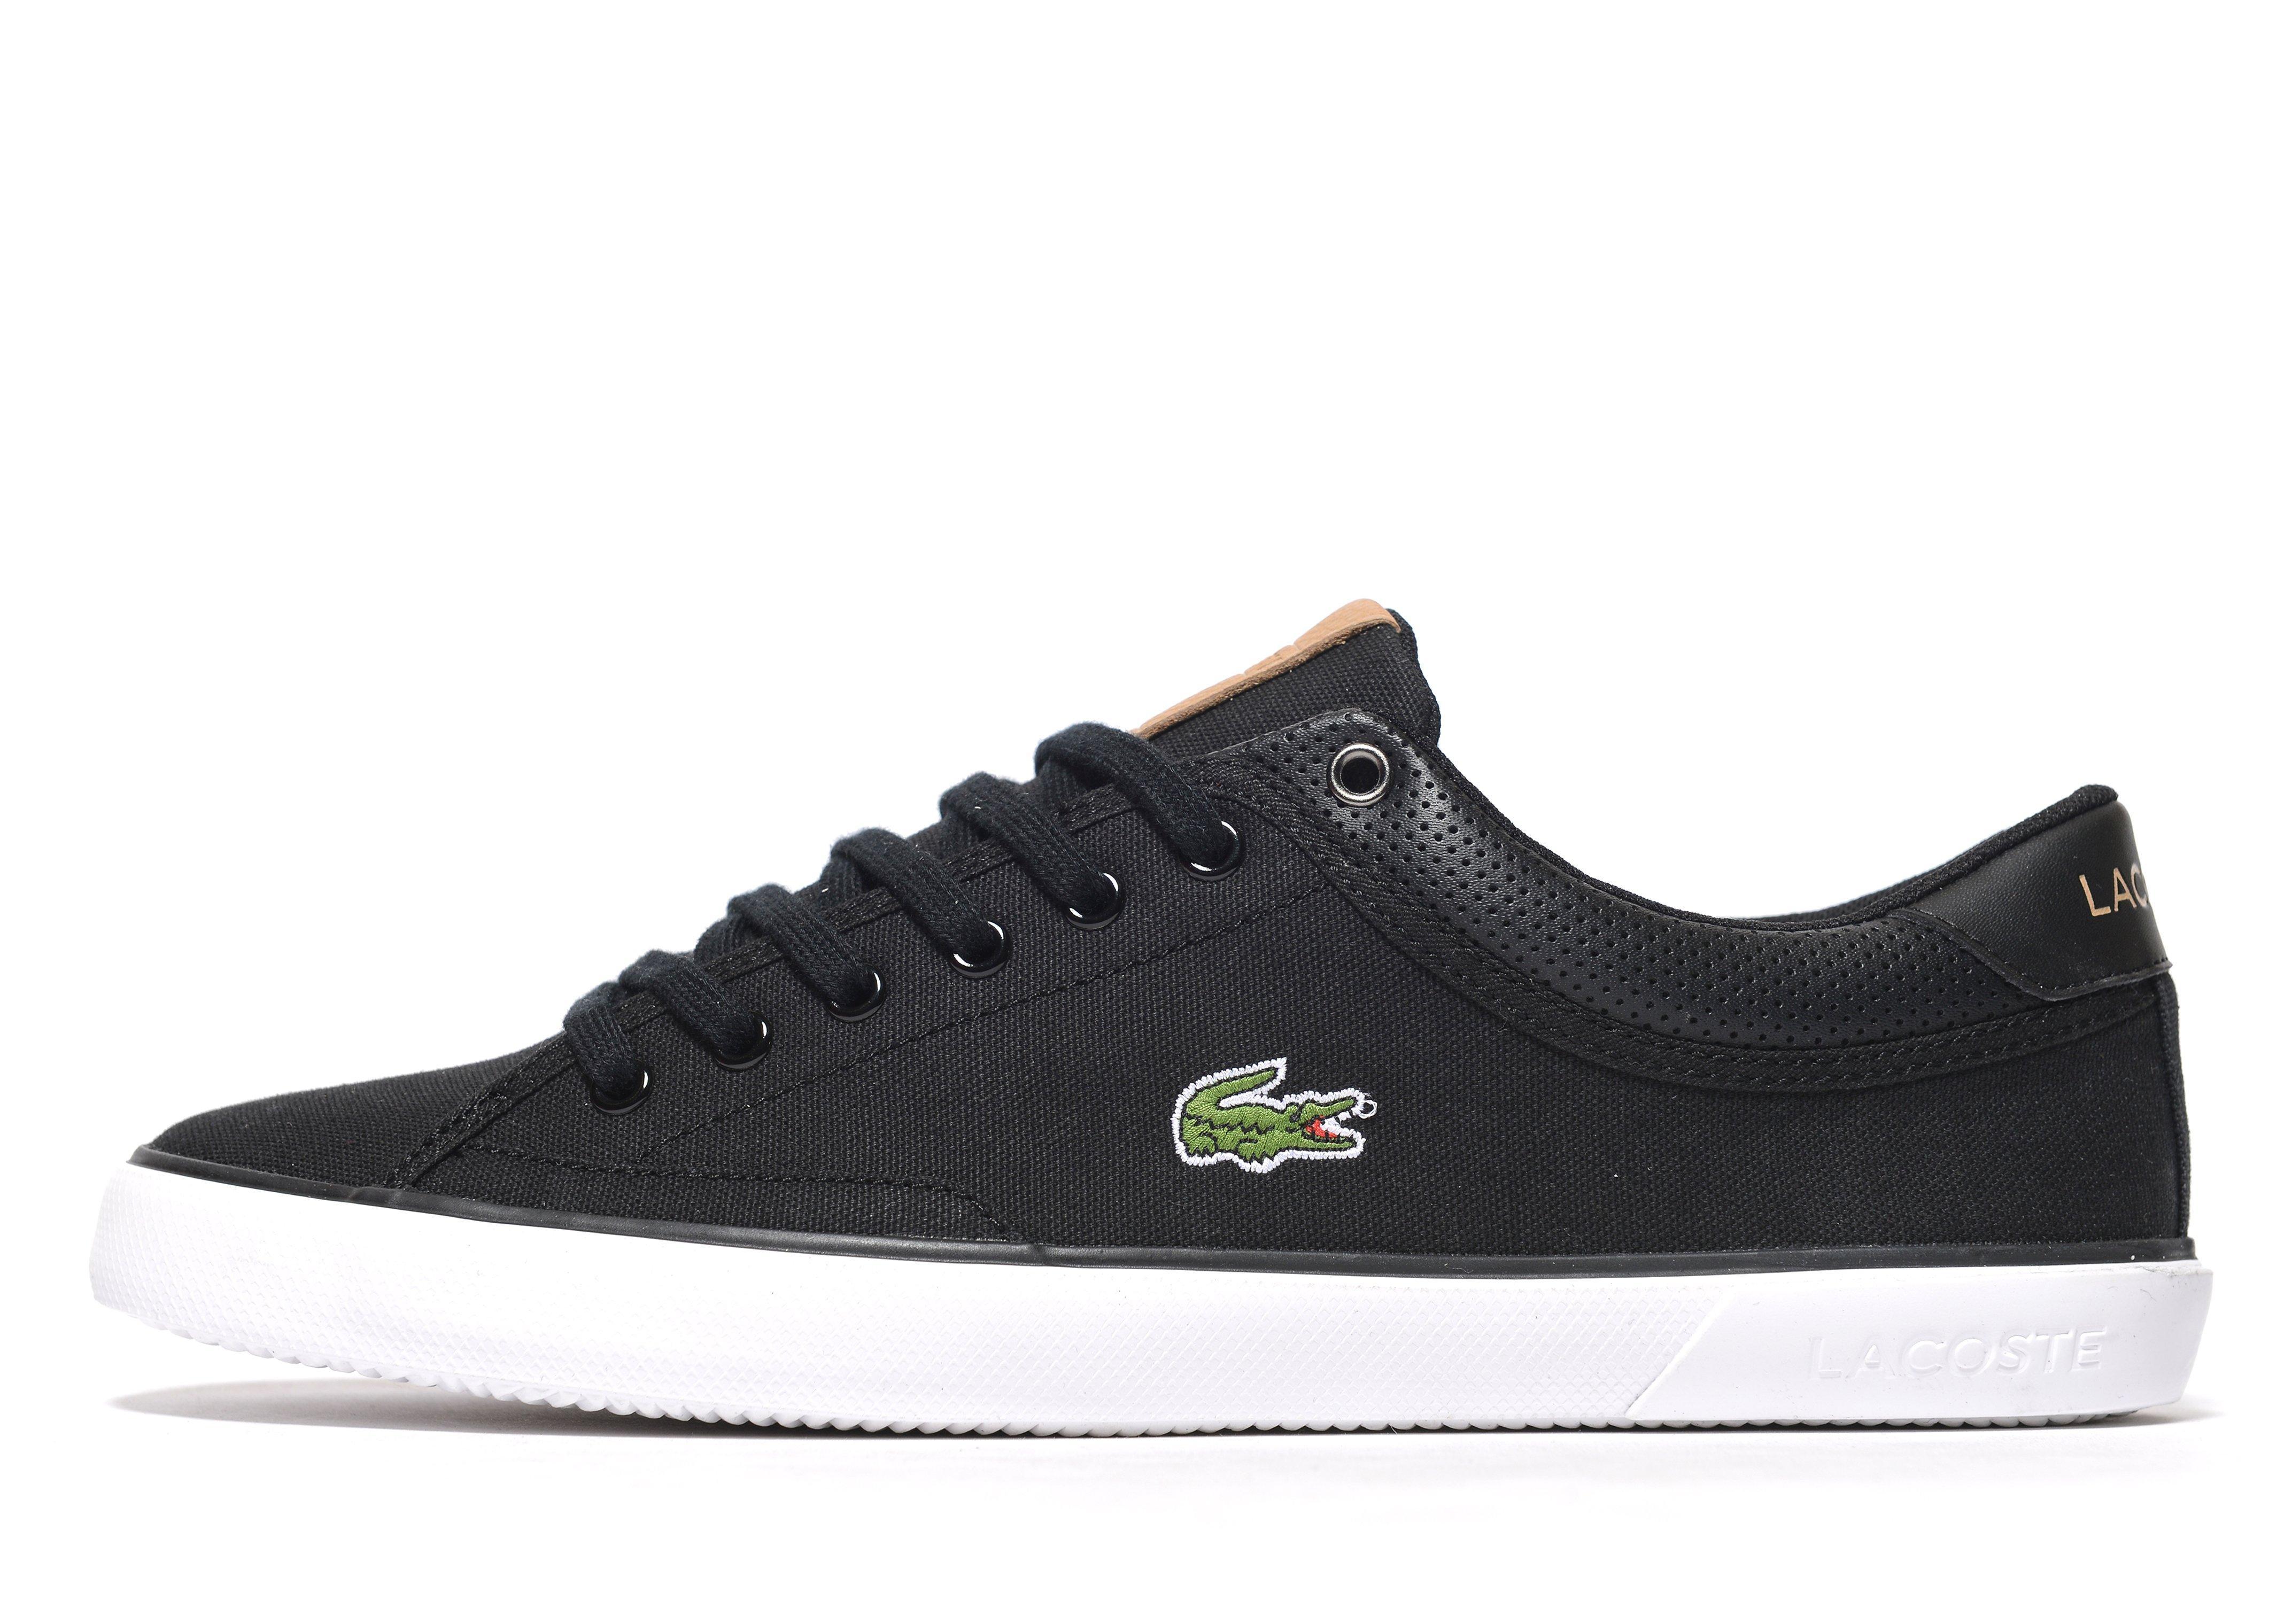 Lacoste Leather Angha 217 in Black/Tan 